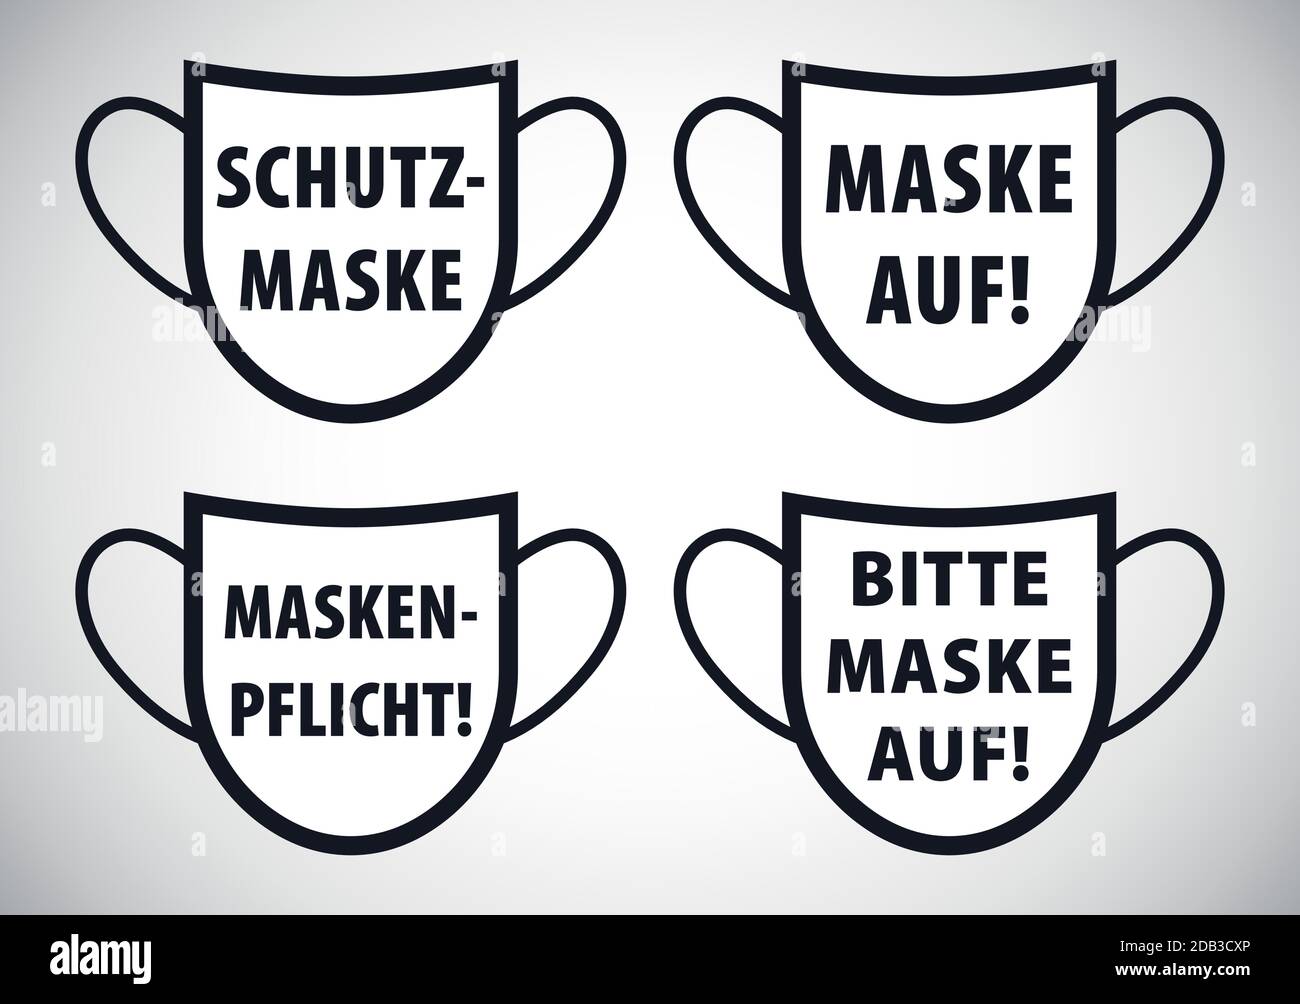 German face mask request or requirement signs vector illustration Stock Vector